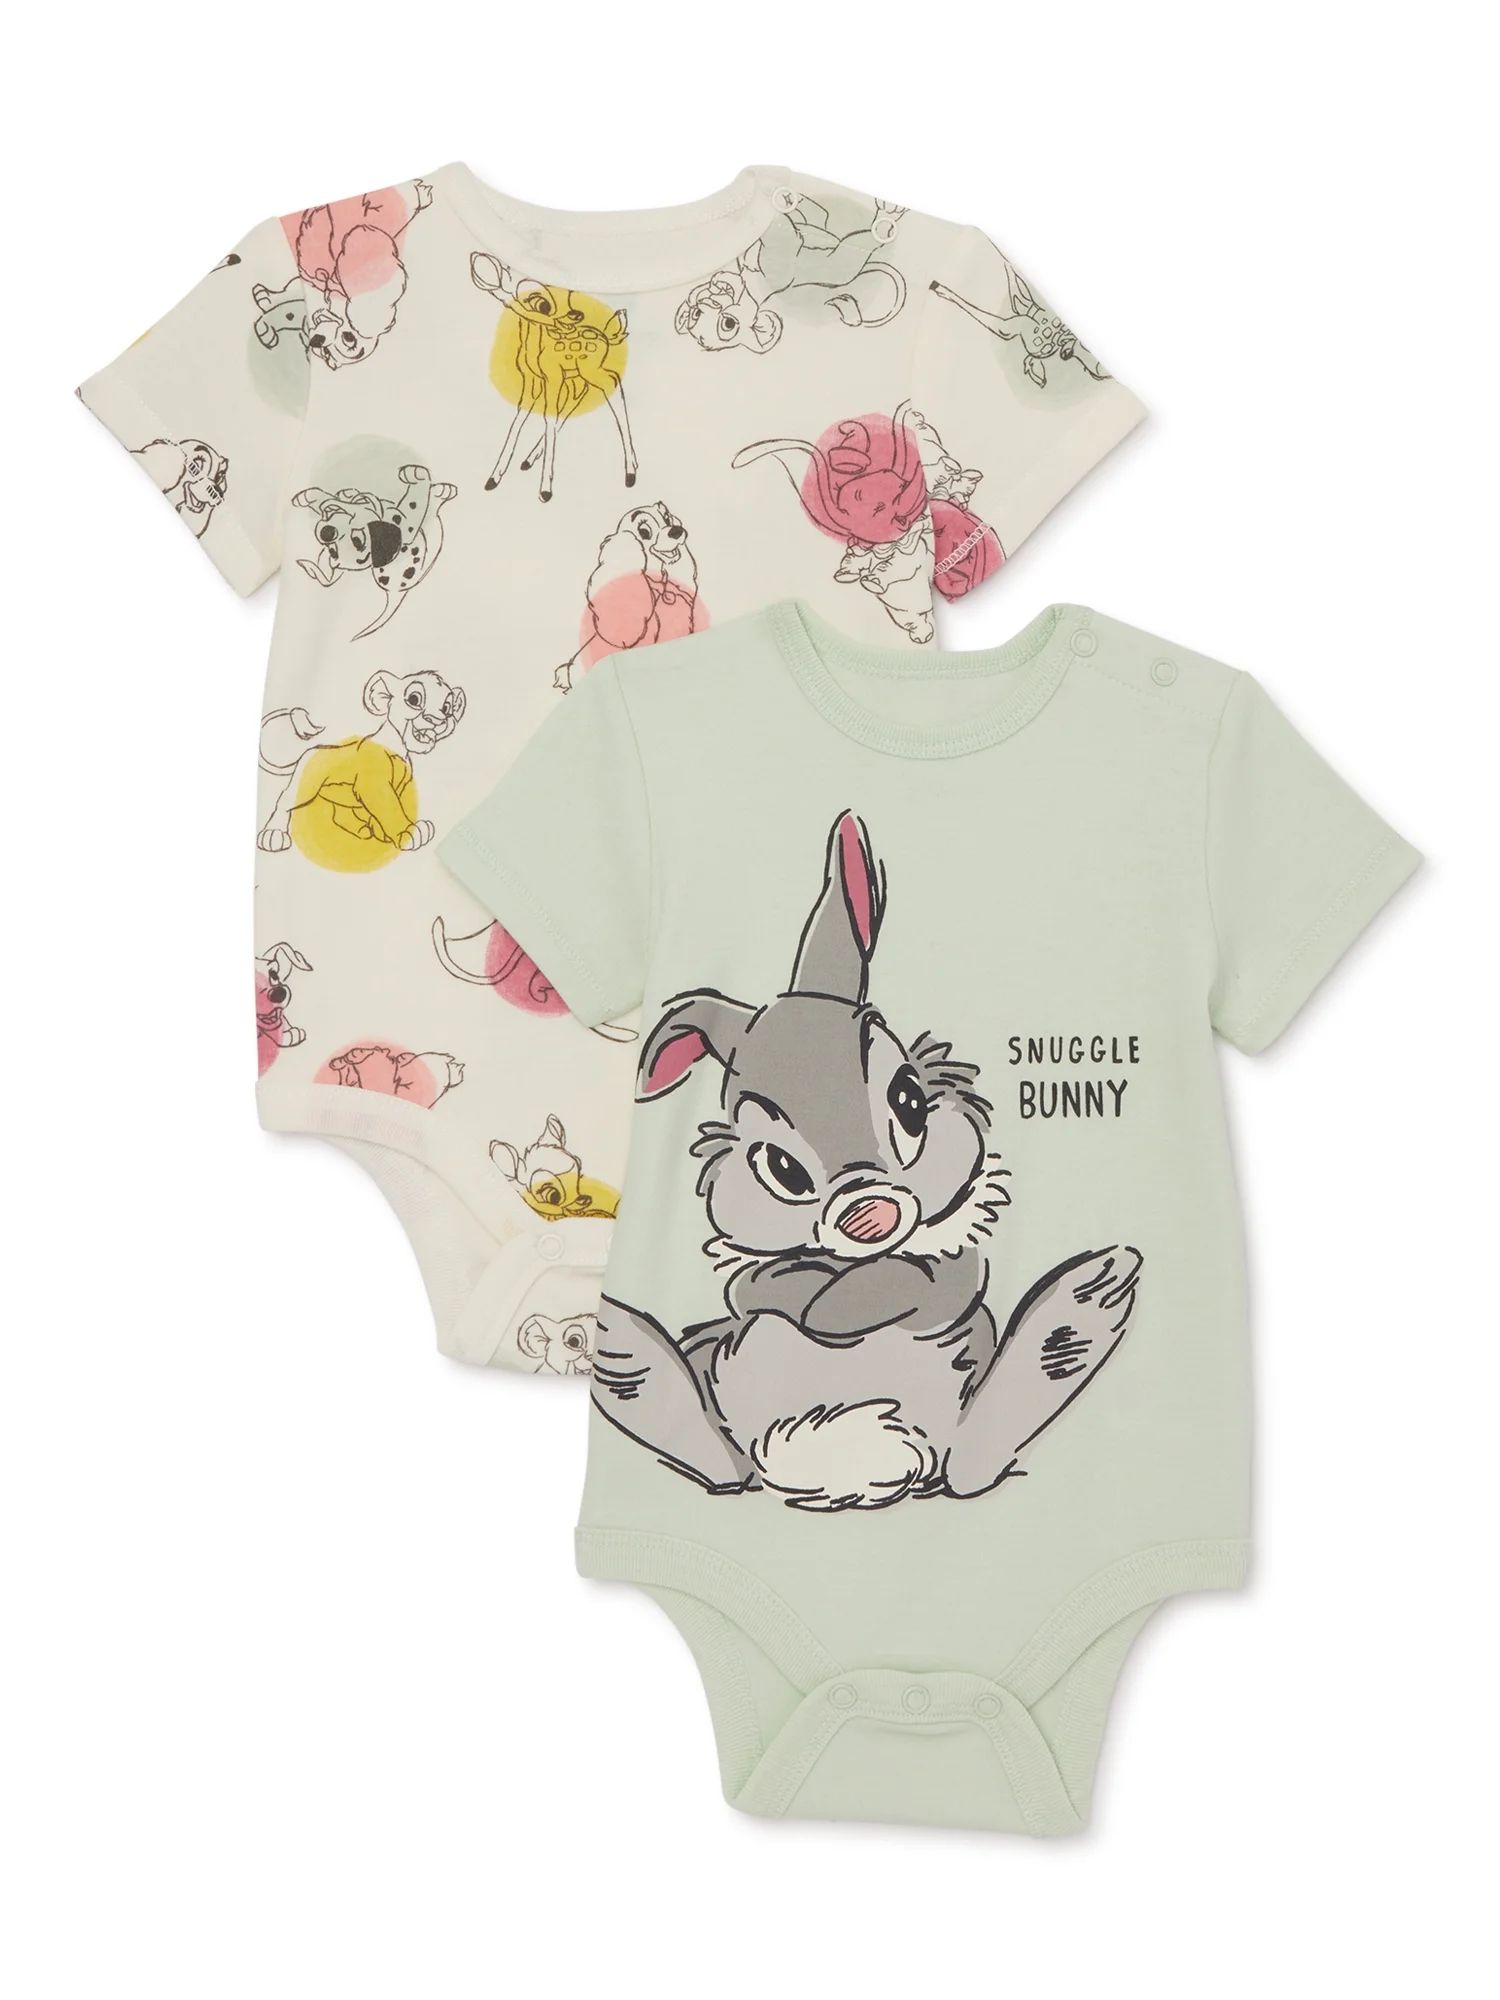 Disney Classics Baby Bodysuits with Short Sleeves, 2-Pack, Sizes 0/3M-24M | Walmart (US)